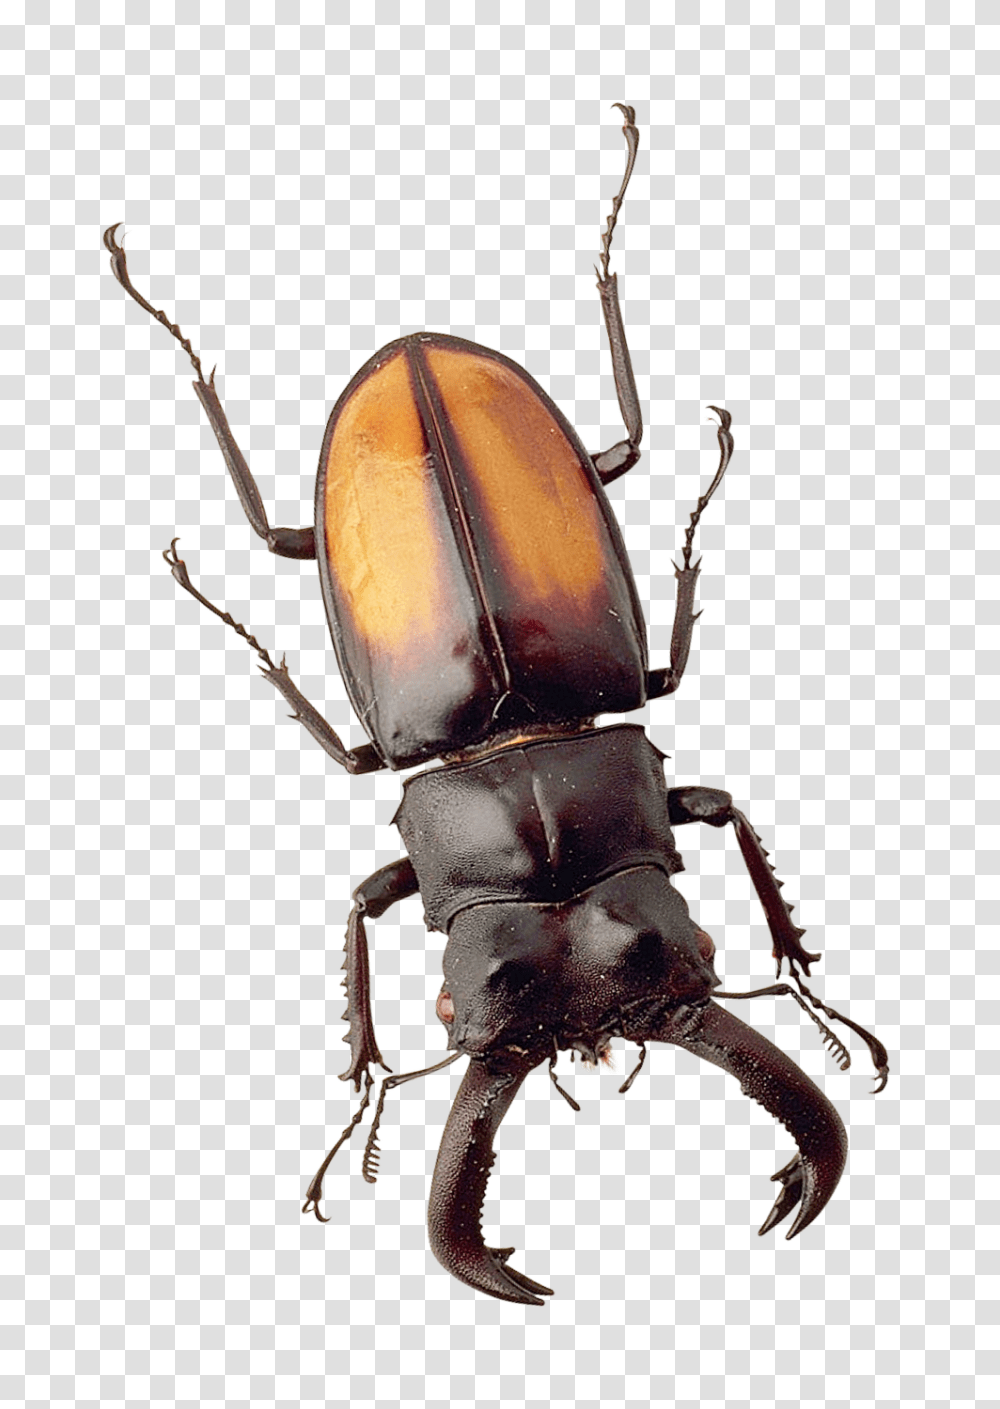 Beetle Image, Insect, Invertebrate, Animal, Cockroach Transparent Png